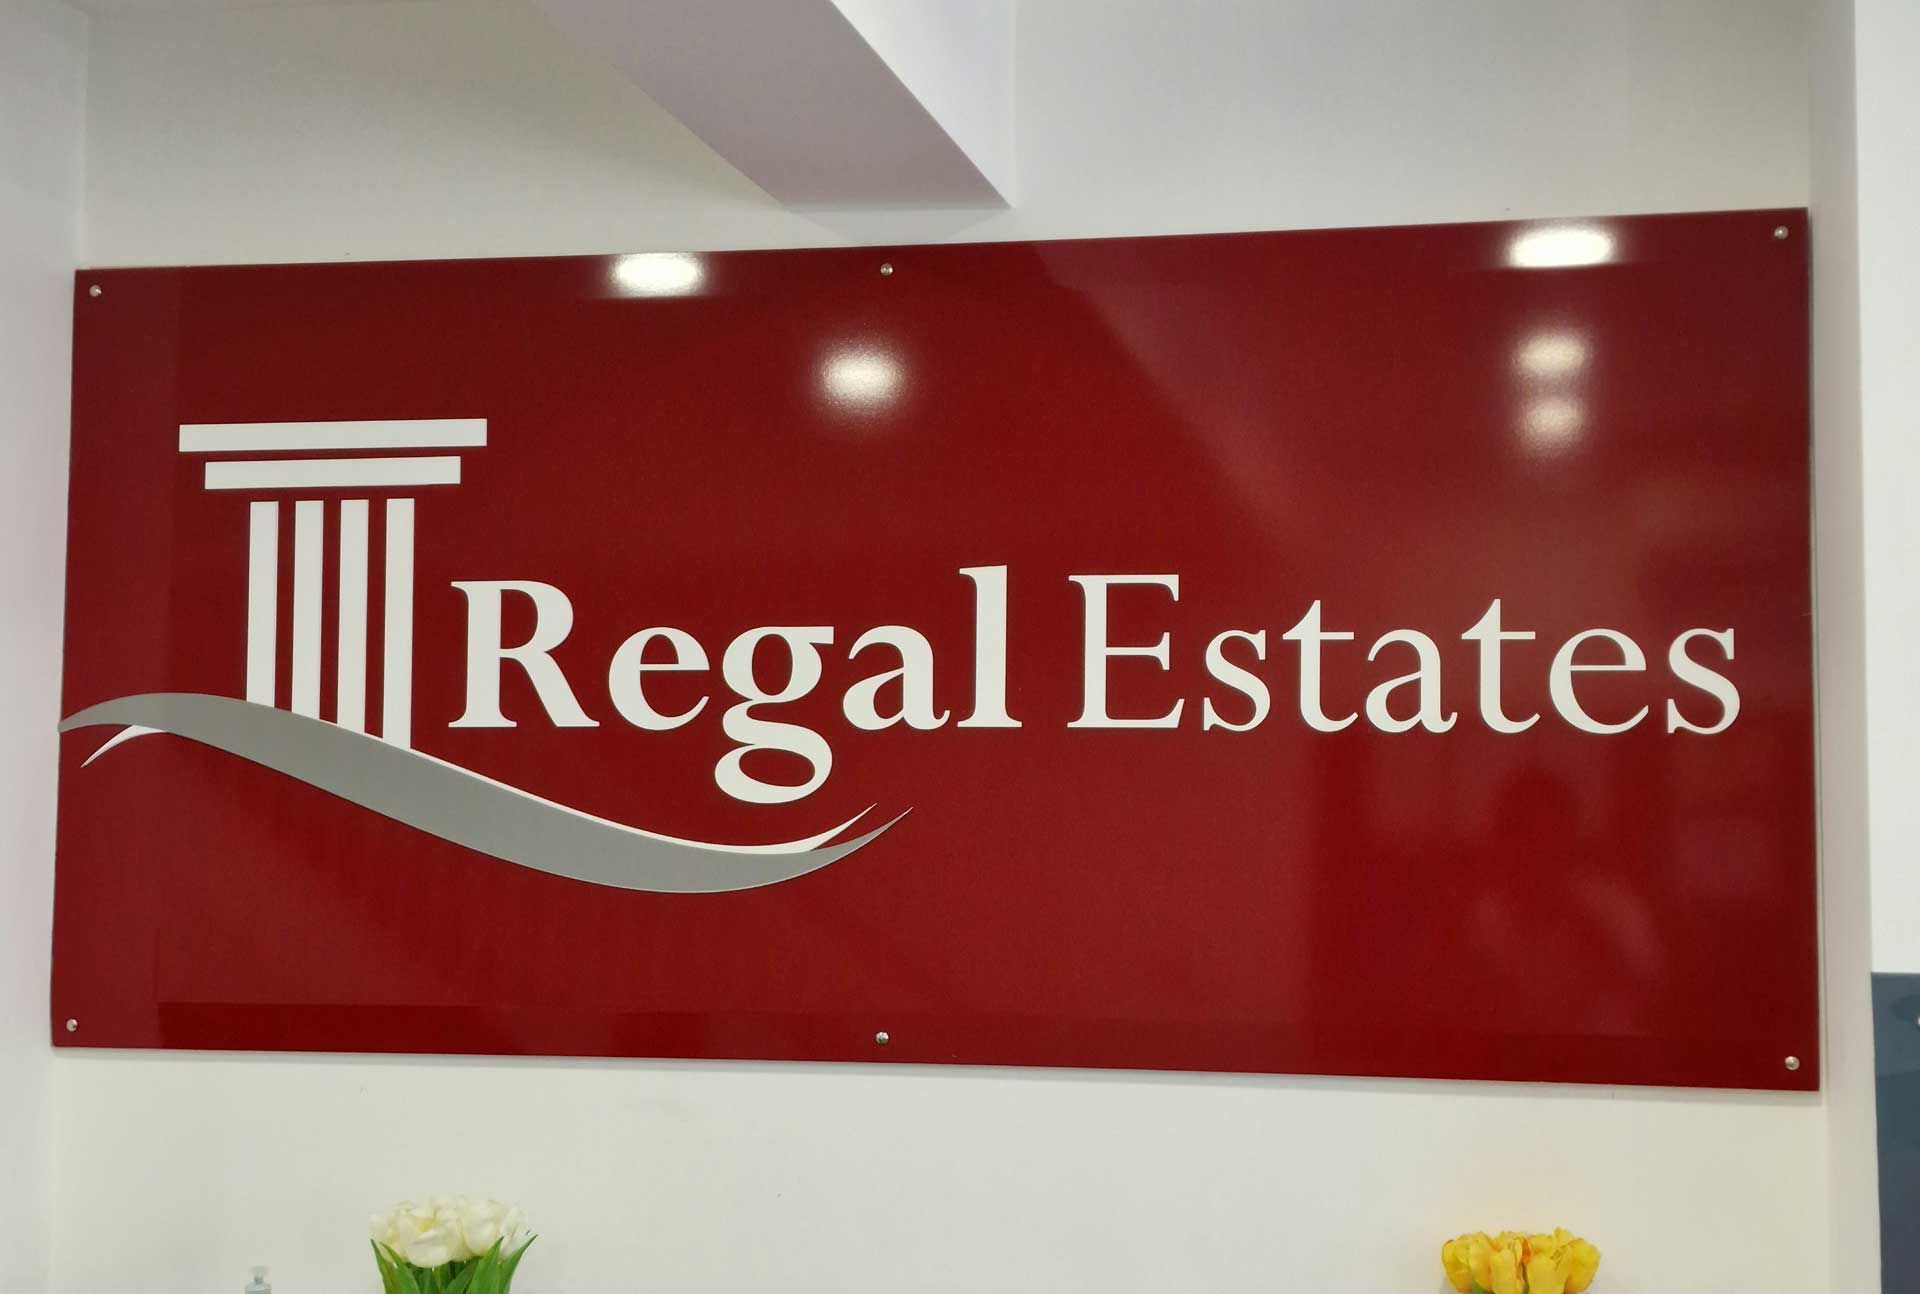 Regal Estates are here to help